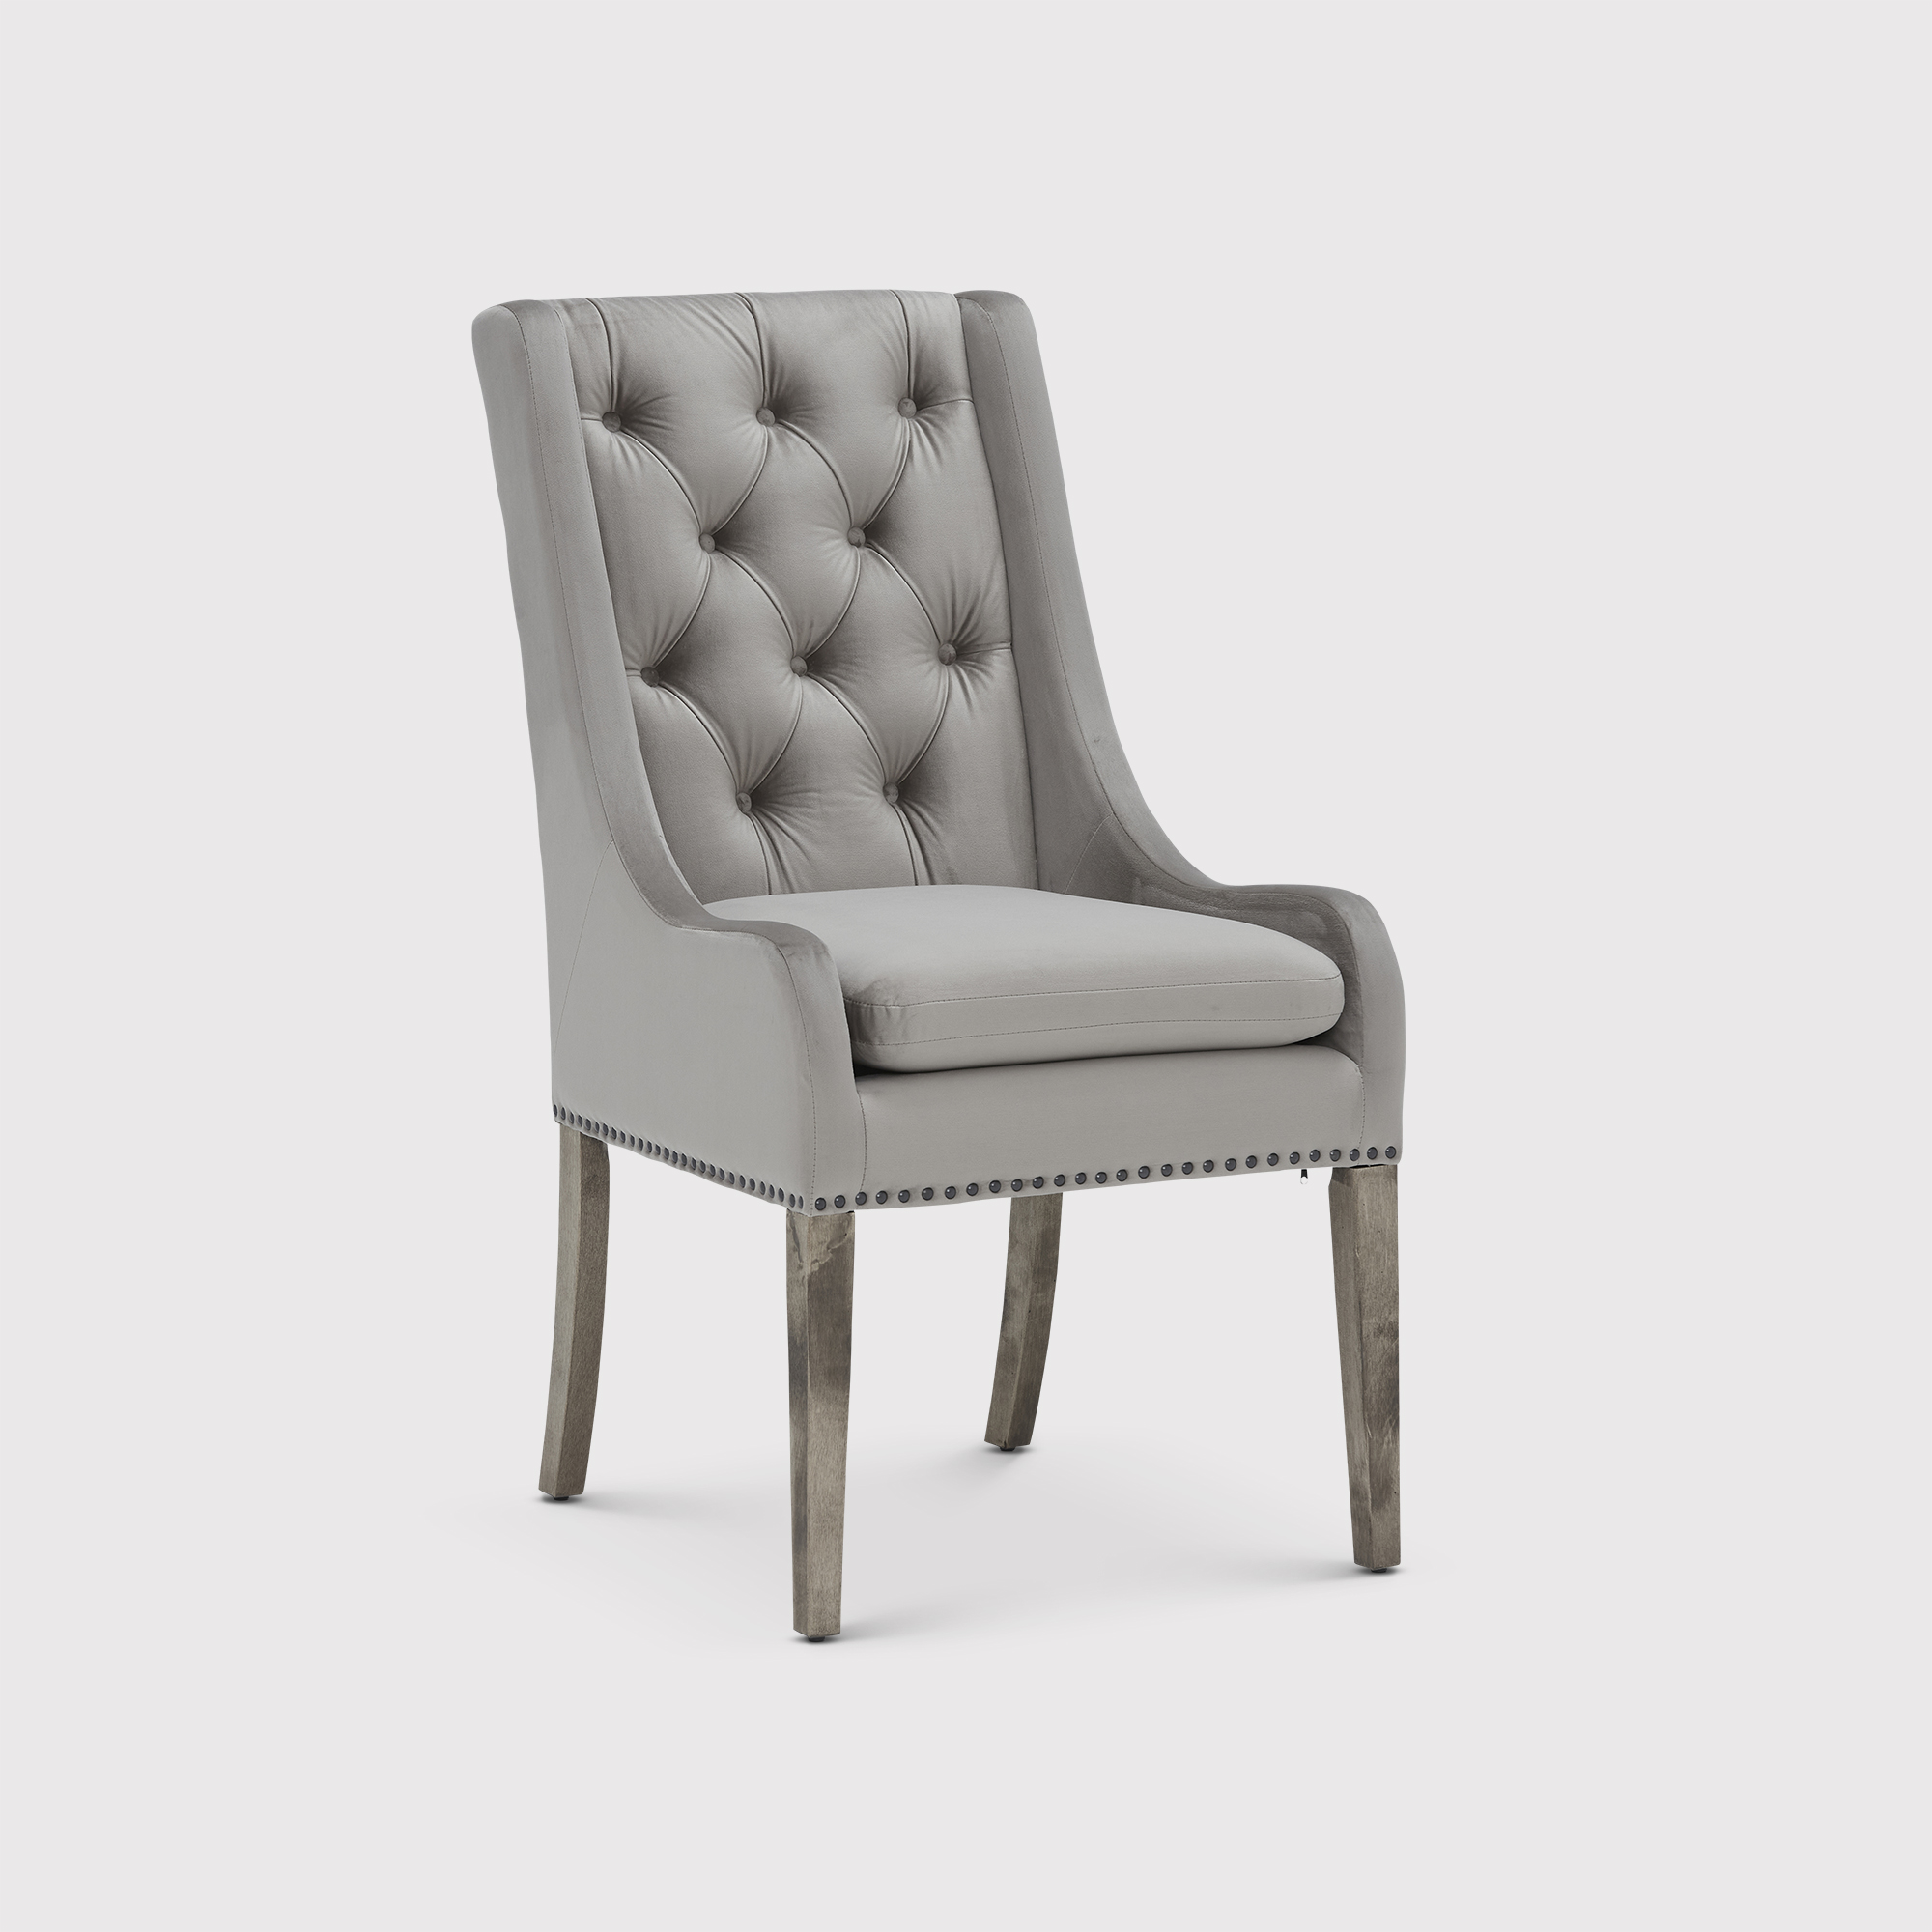 Ophelia Buttoned Back Dining Chair, Neutral | Barker & Stonehouse